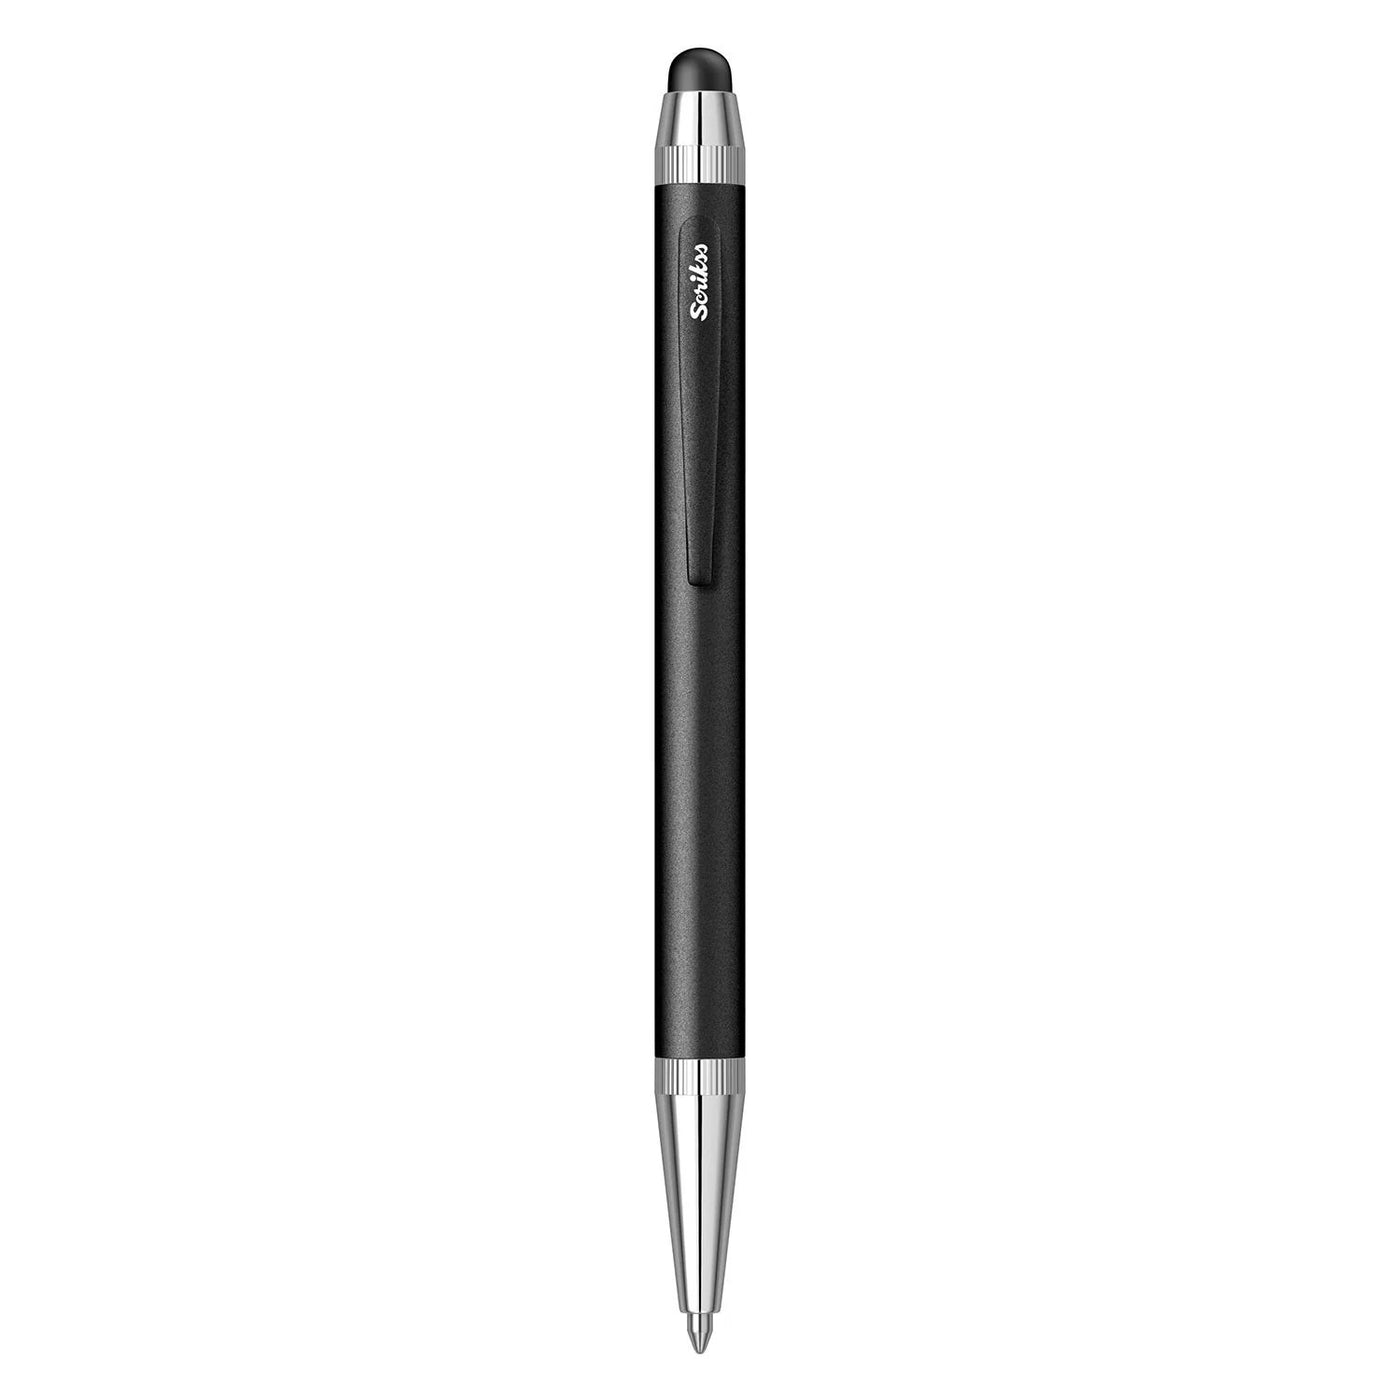 Scrikss Smart 699 Multifunction Ball Pen with Stylus - Black CT 4